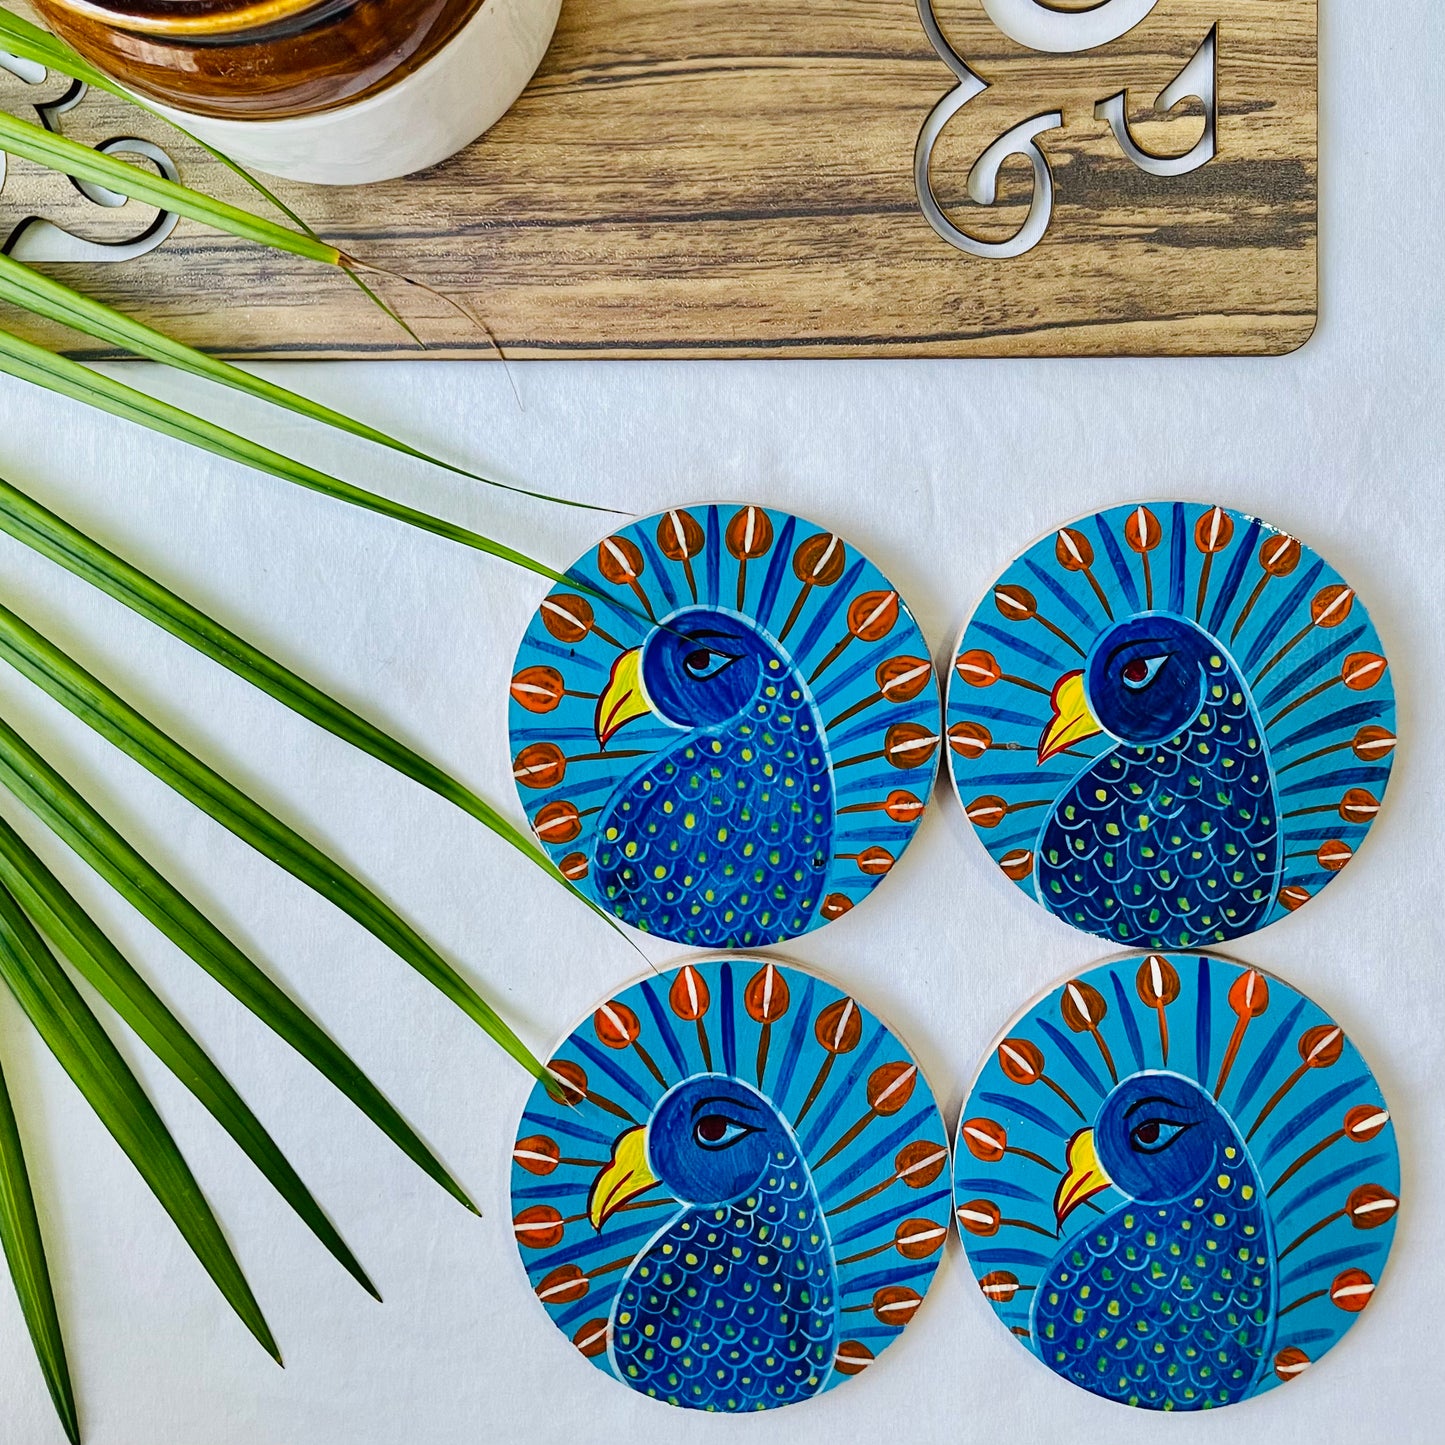 Alokya - 100% natural, Pattachitra painted terracotta coasters - Round coasters: blue bird painted on the surface.